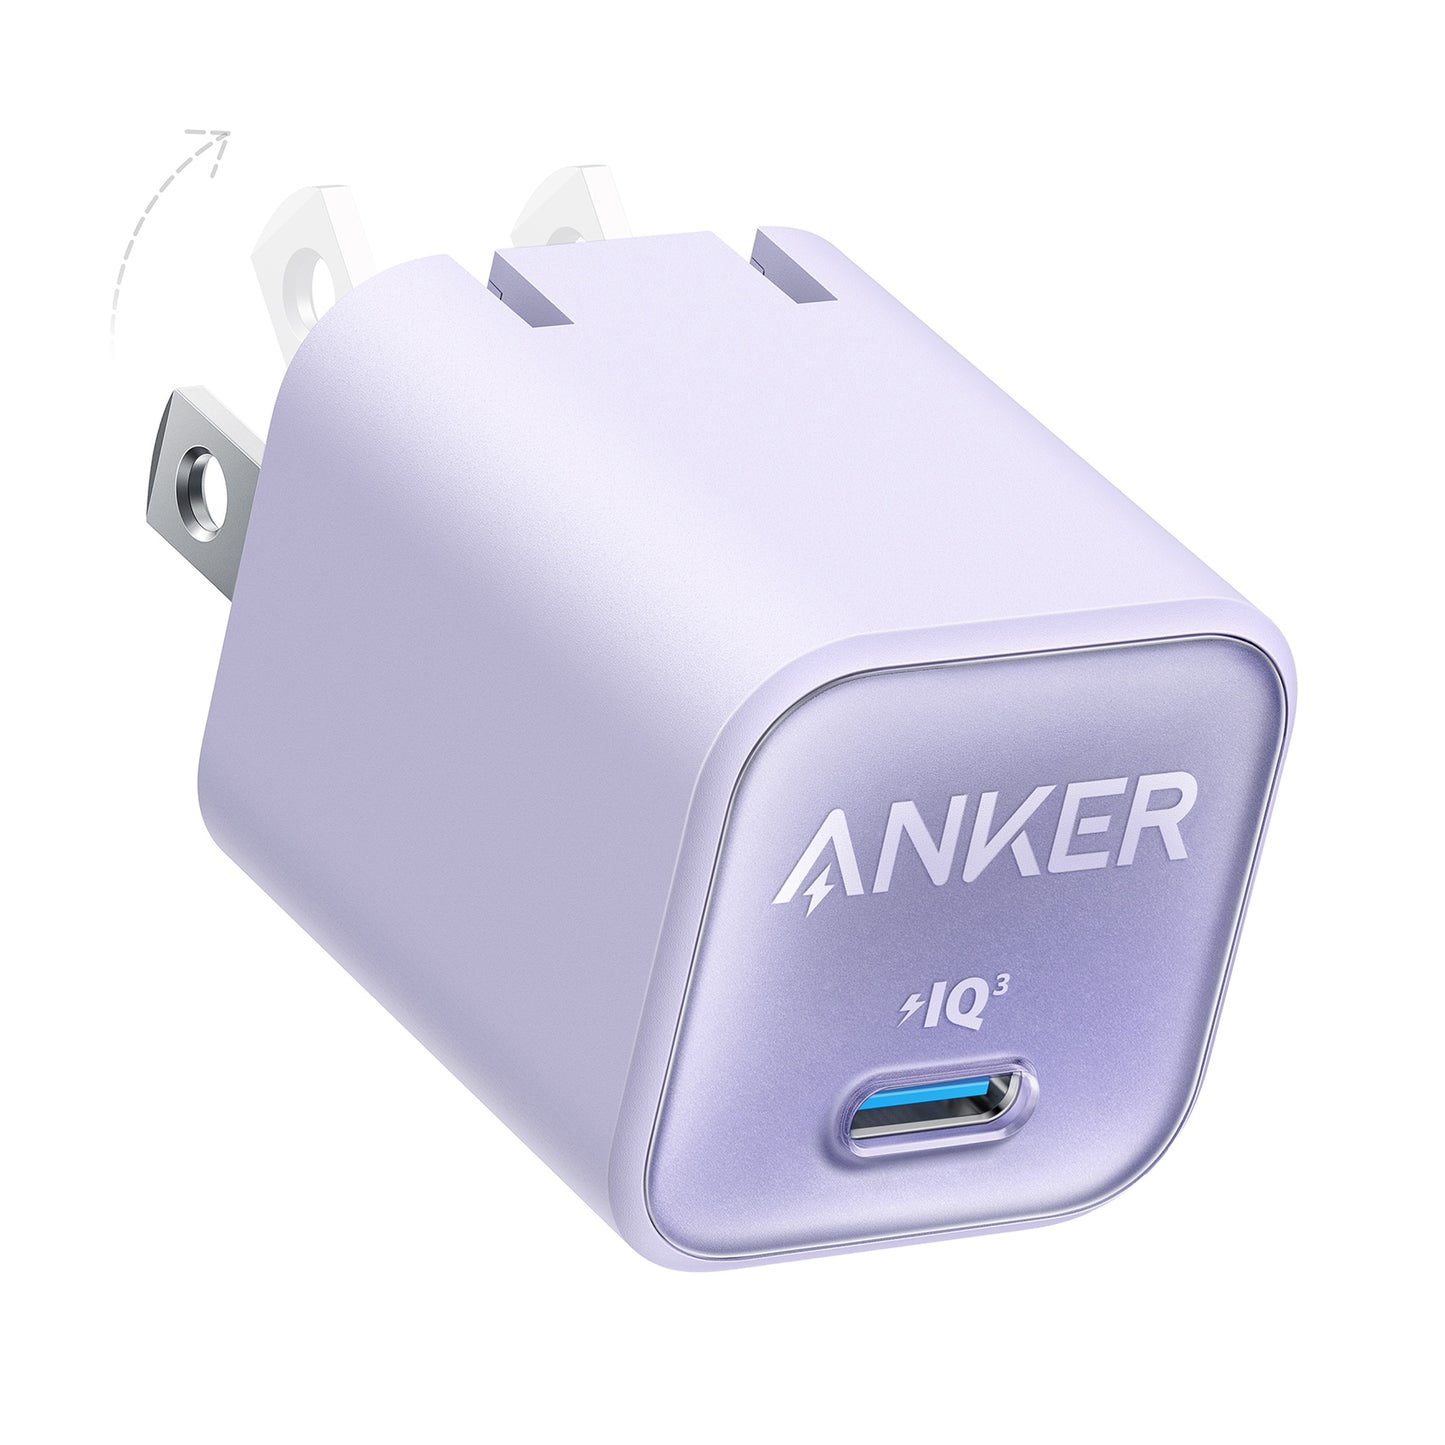 Anker Nano Pro 30W USB-C Power Delivery Wall Charger - White